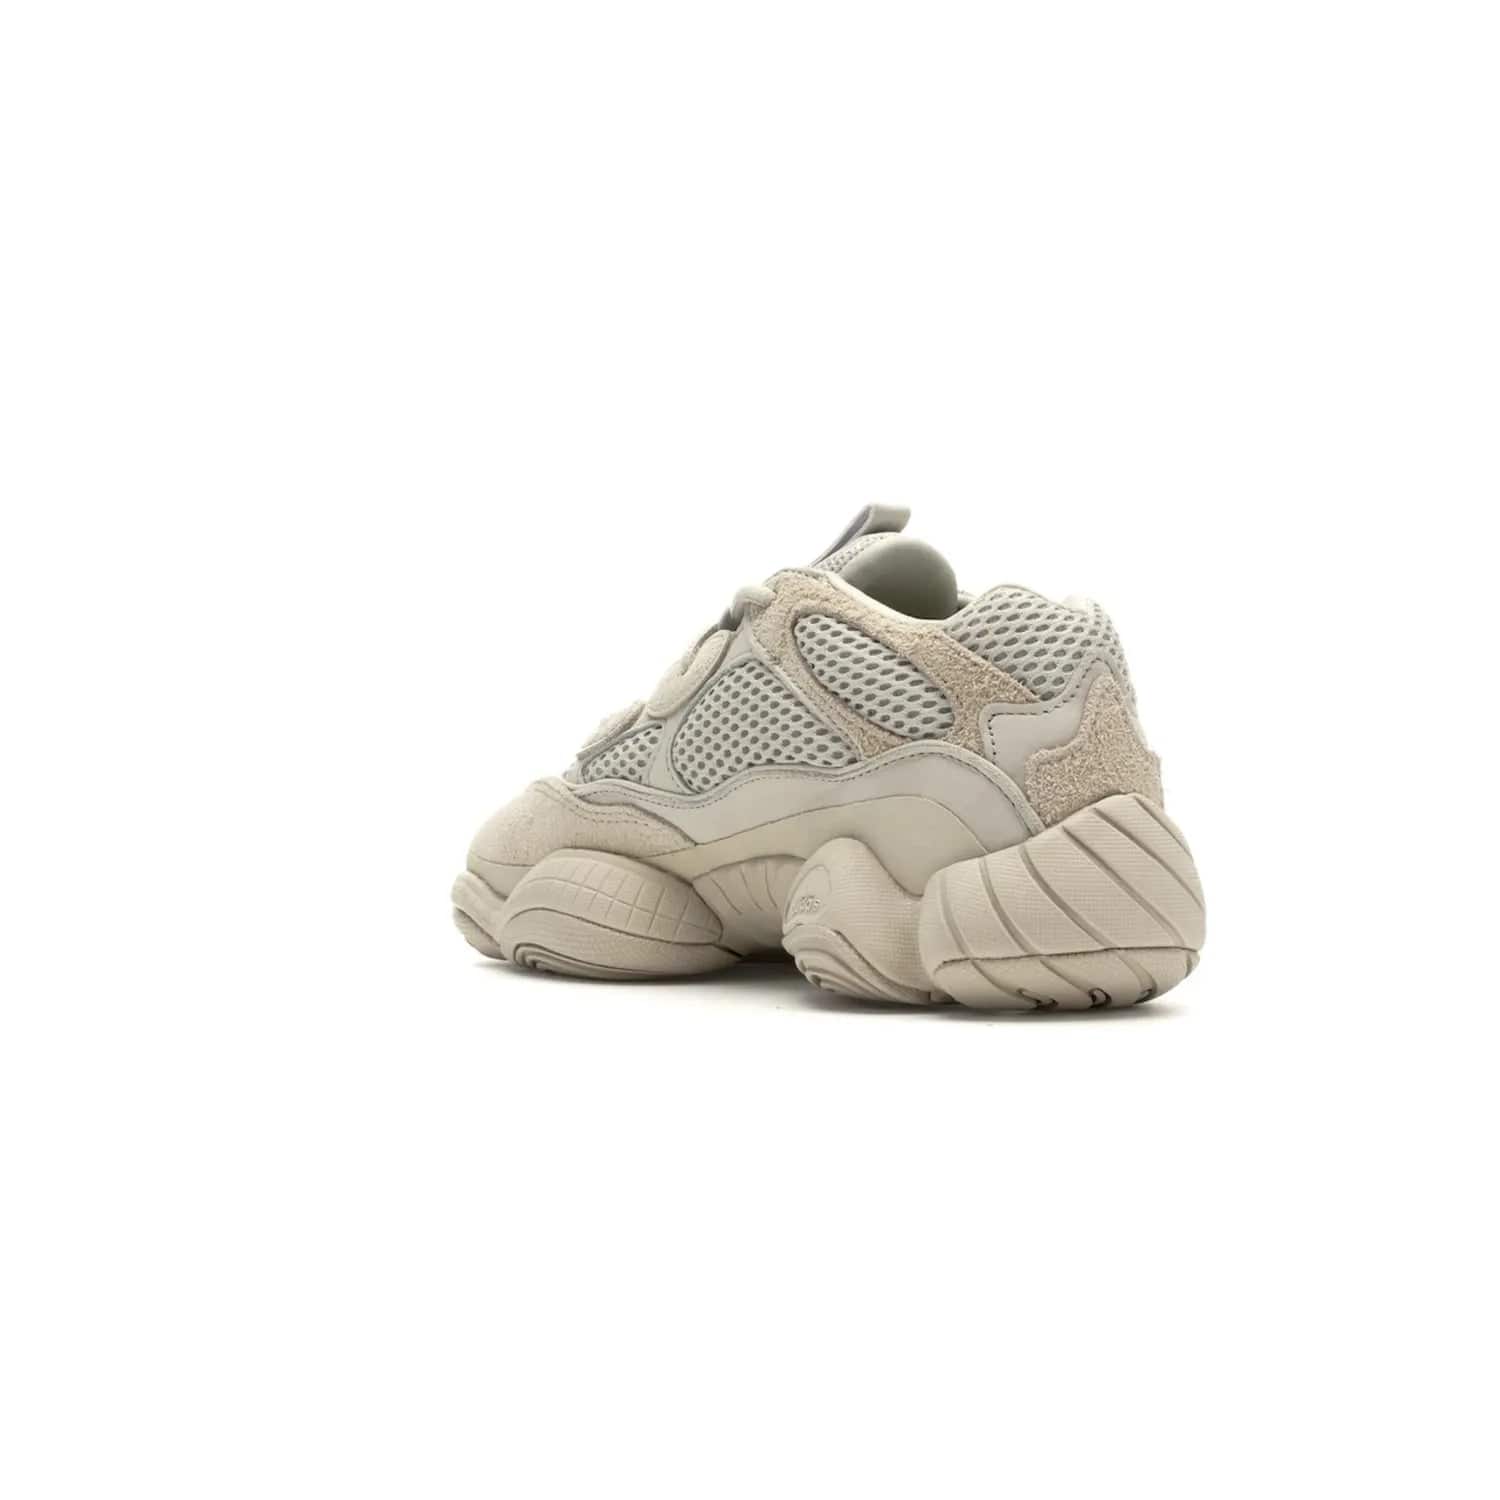 adidas Yeezy 500 Blush - Image 24 - Only at www.BallersClubKickz.com - Step up your sneaker game with the Adidas Yeezy 500 Blush. Monochromatic pale pink palette, hiking-inspired suede/mesh construction, plus adiPRENE sole for comfort and performance. Get the Adidas Yeezy 500 and experience true style and comfort.